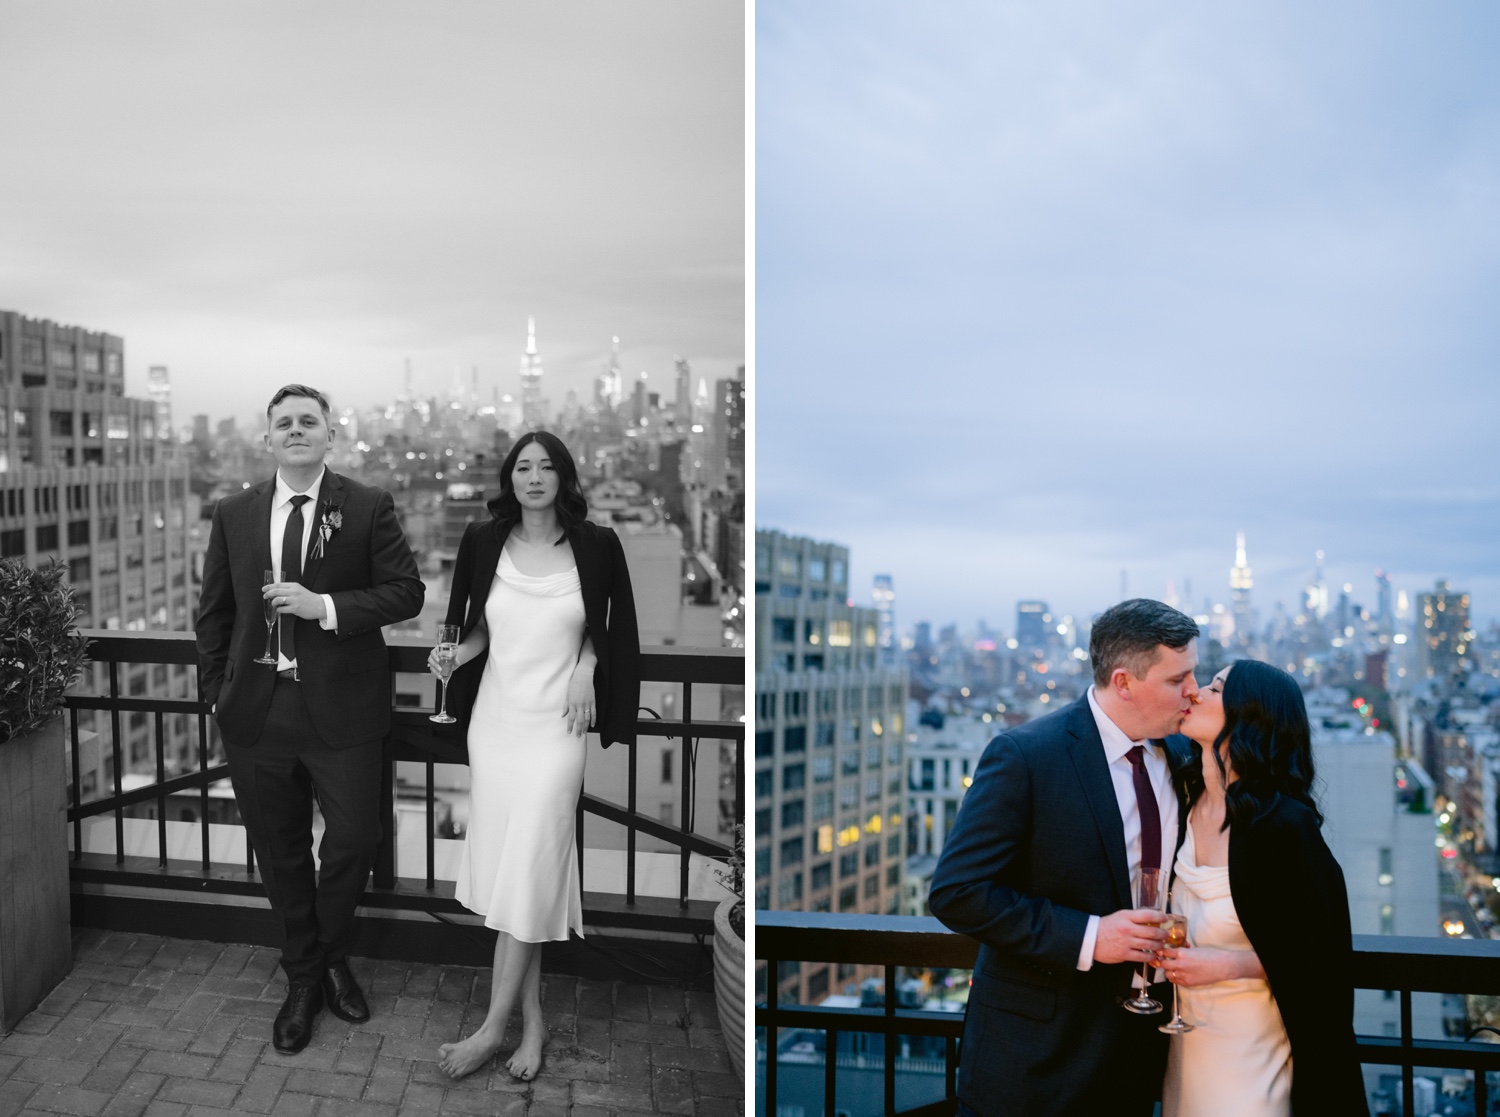 Rooftop wedding at night in New York City at Soho Grand Hotel